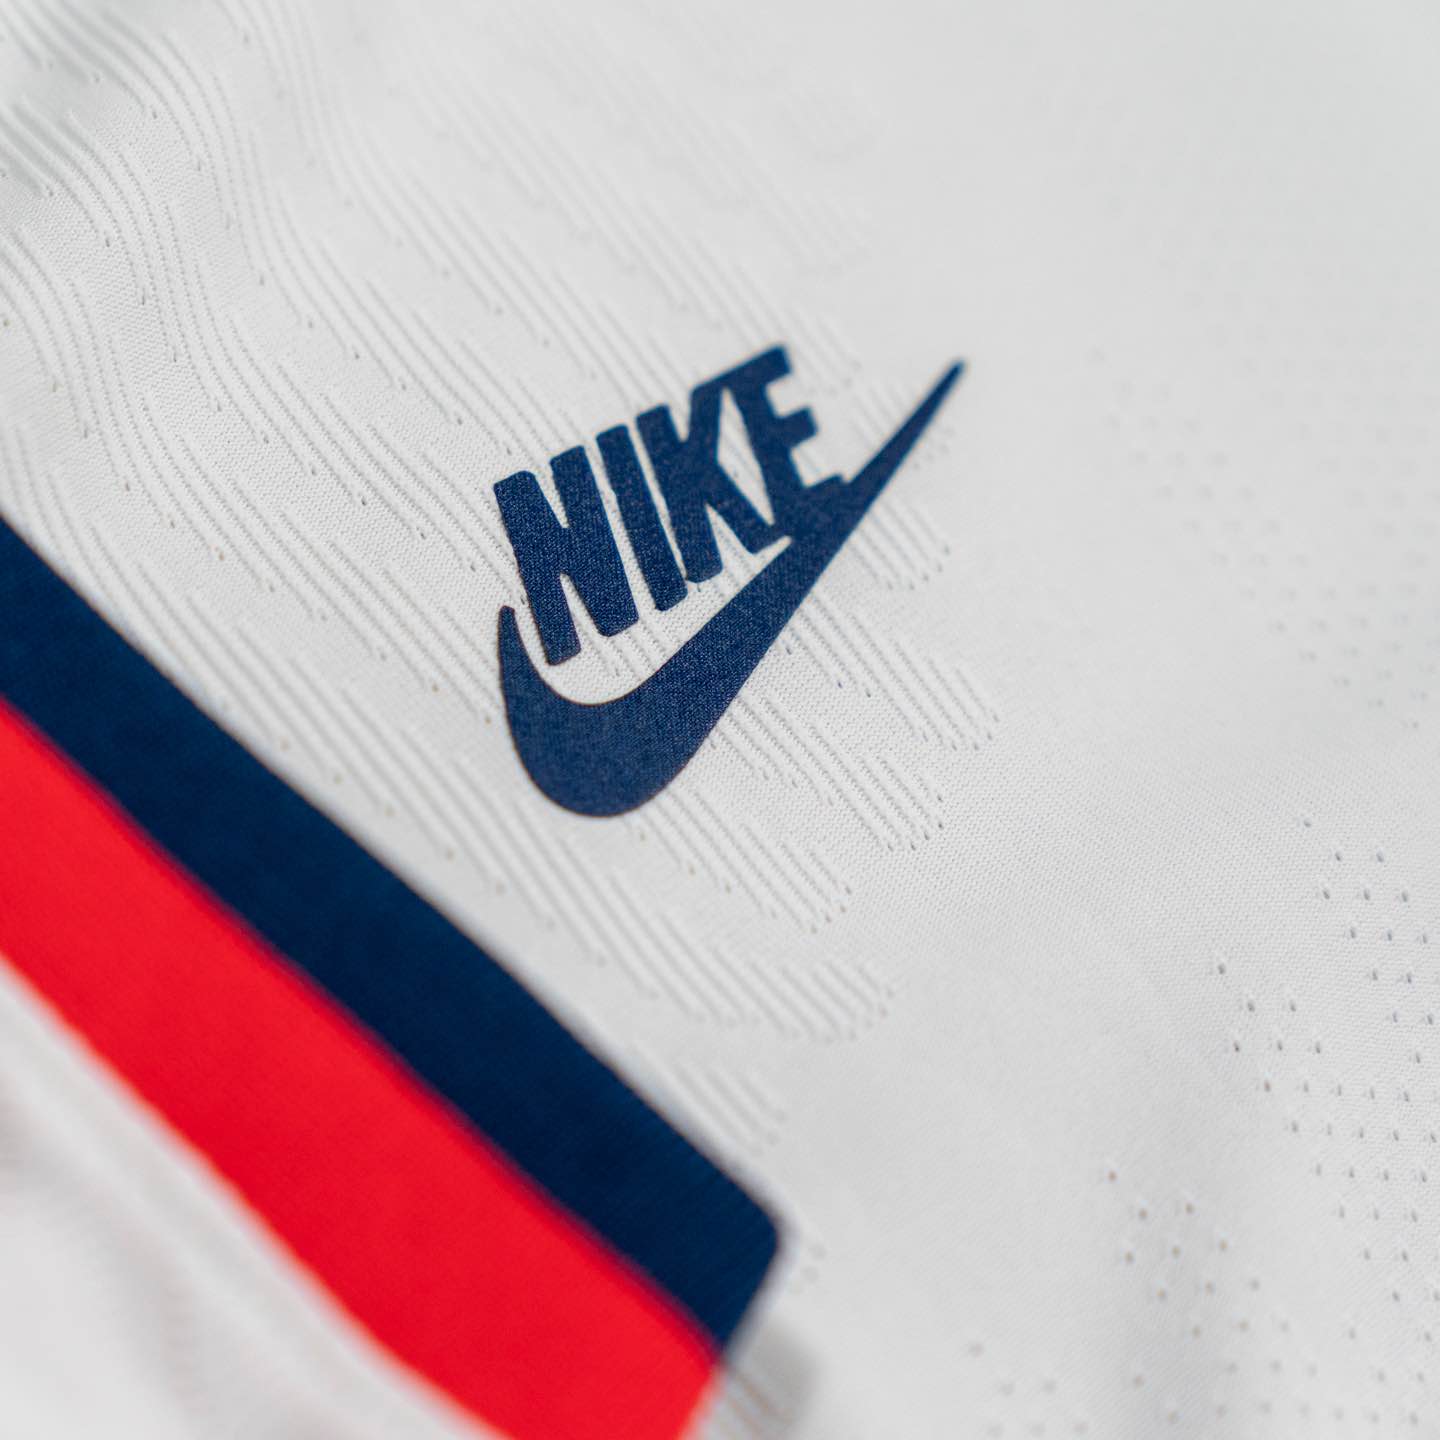 Uswnt Usmnt Jersey Launch Nike Soccer Uniforms Home Away